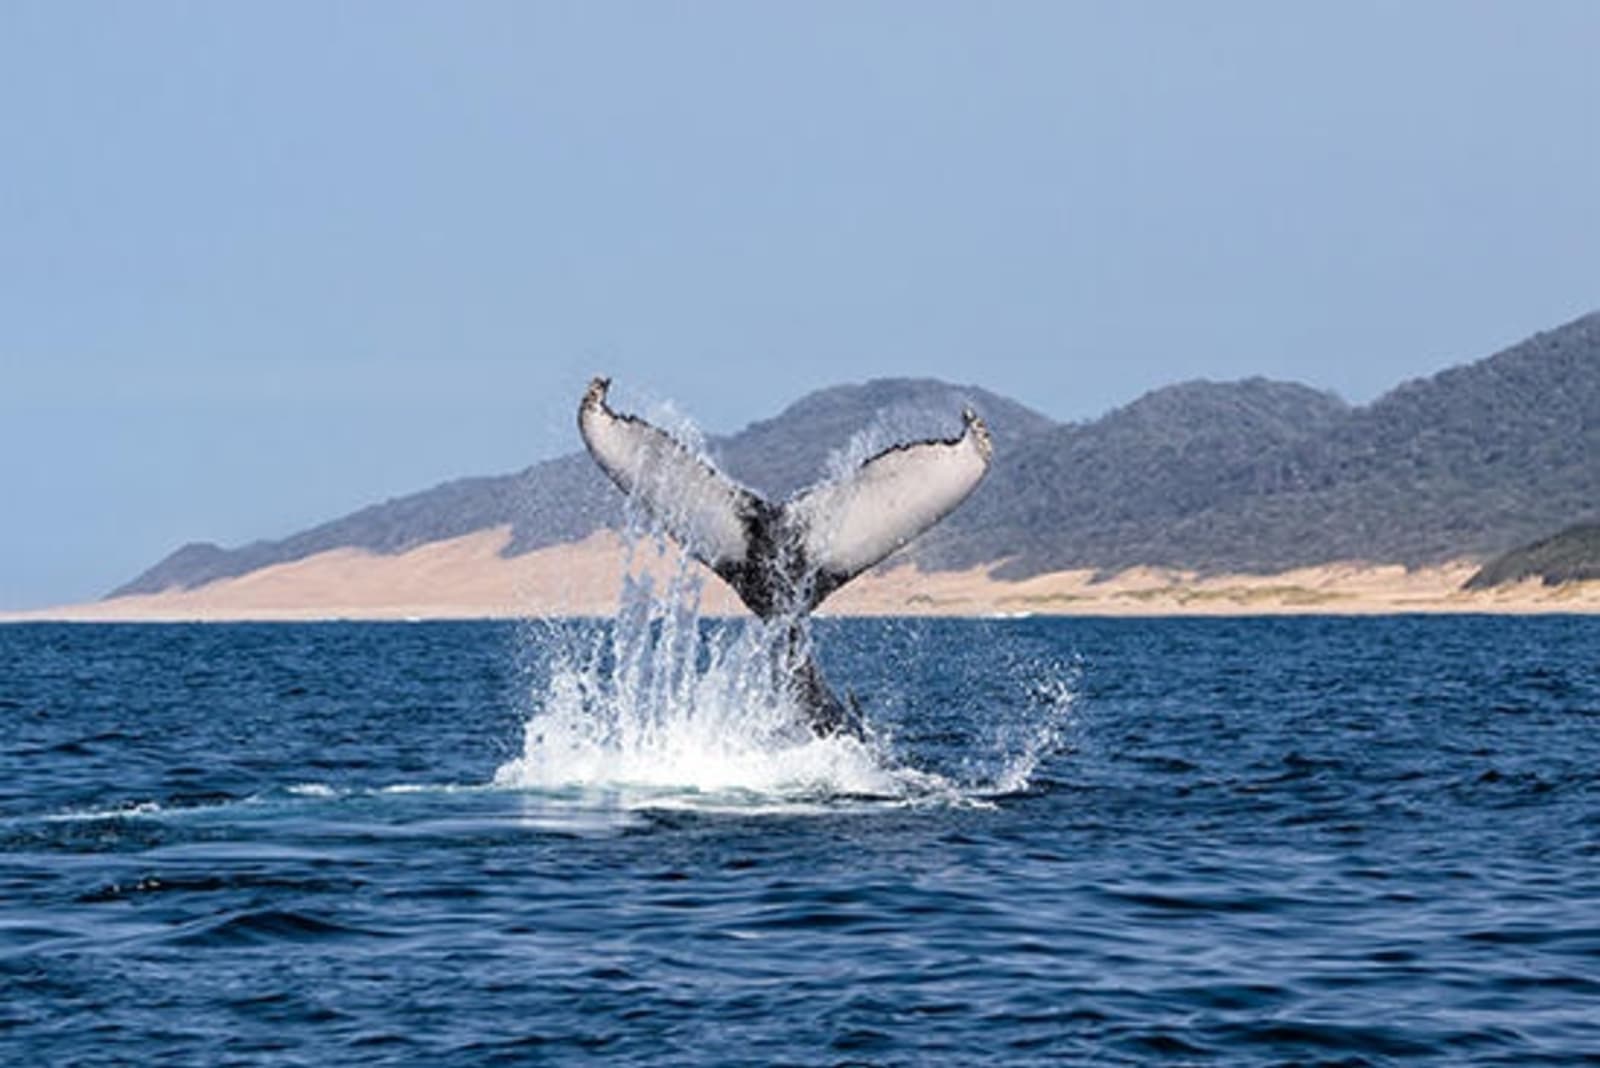 RS-Humpback-whale-south-africa-shutterstock_358955297.jpg